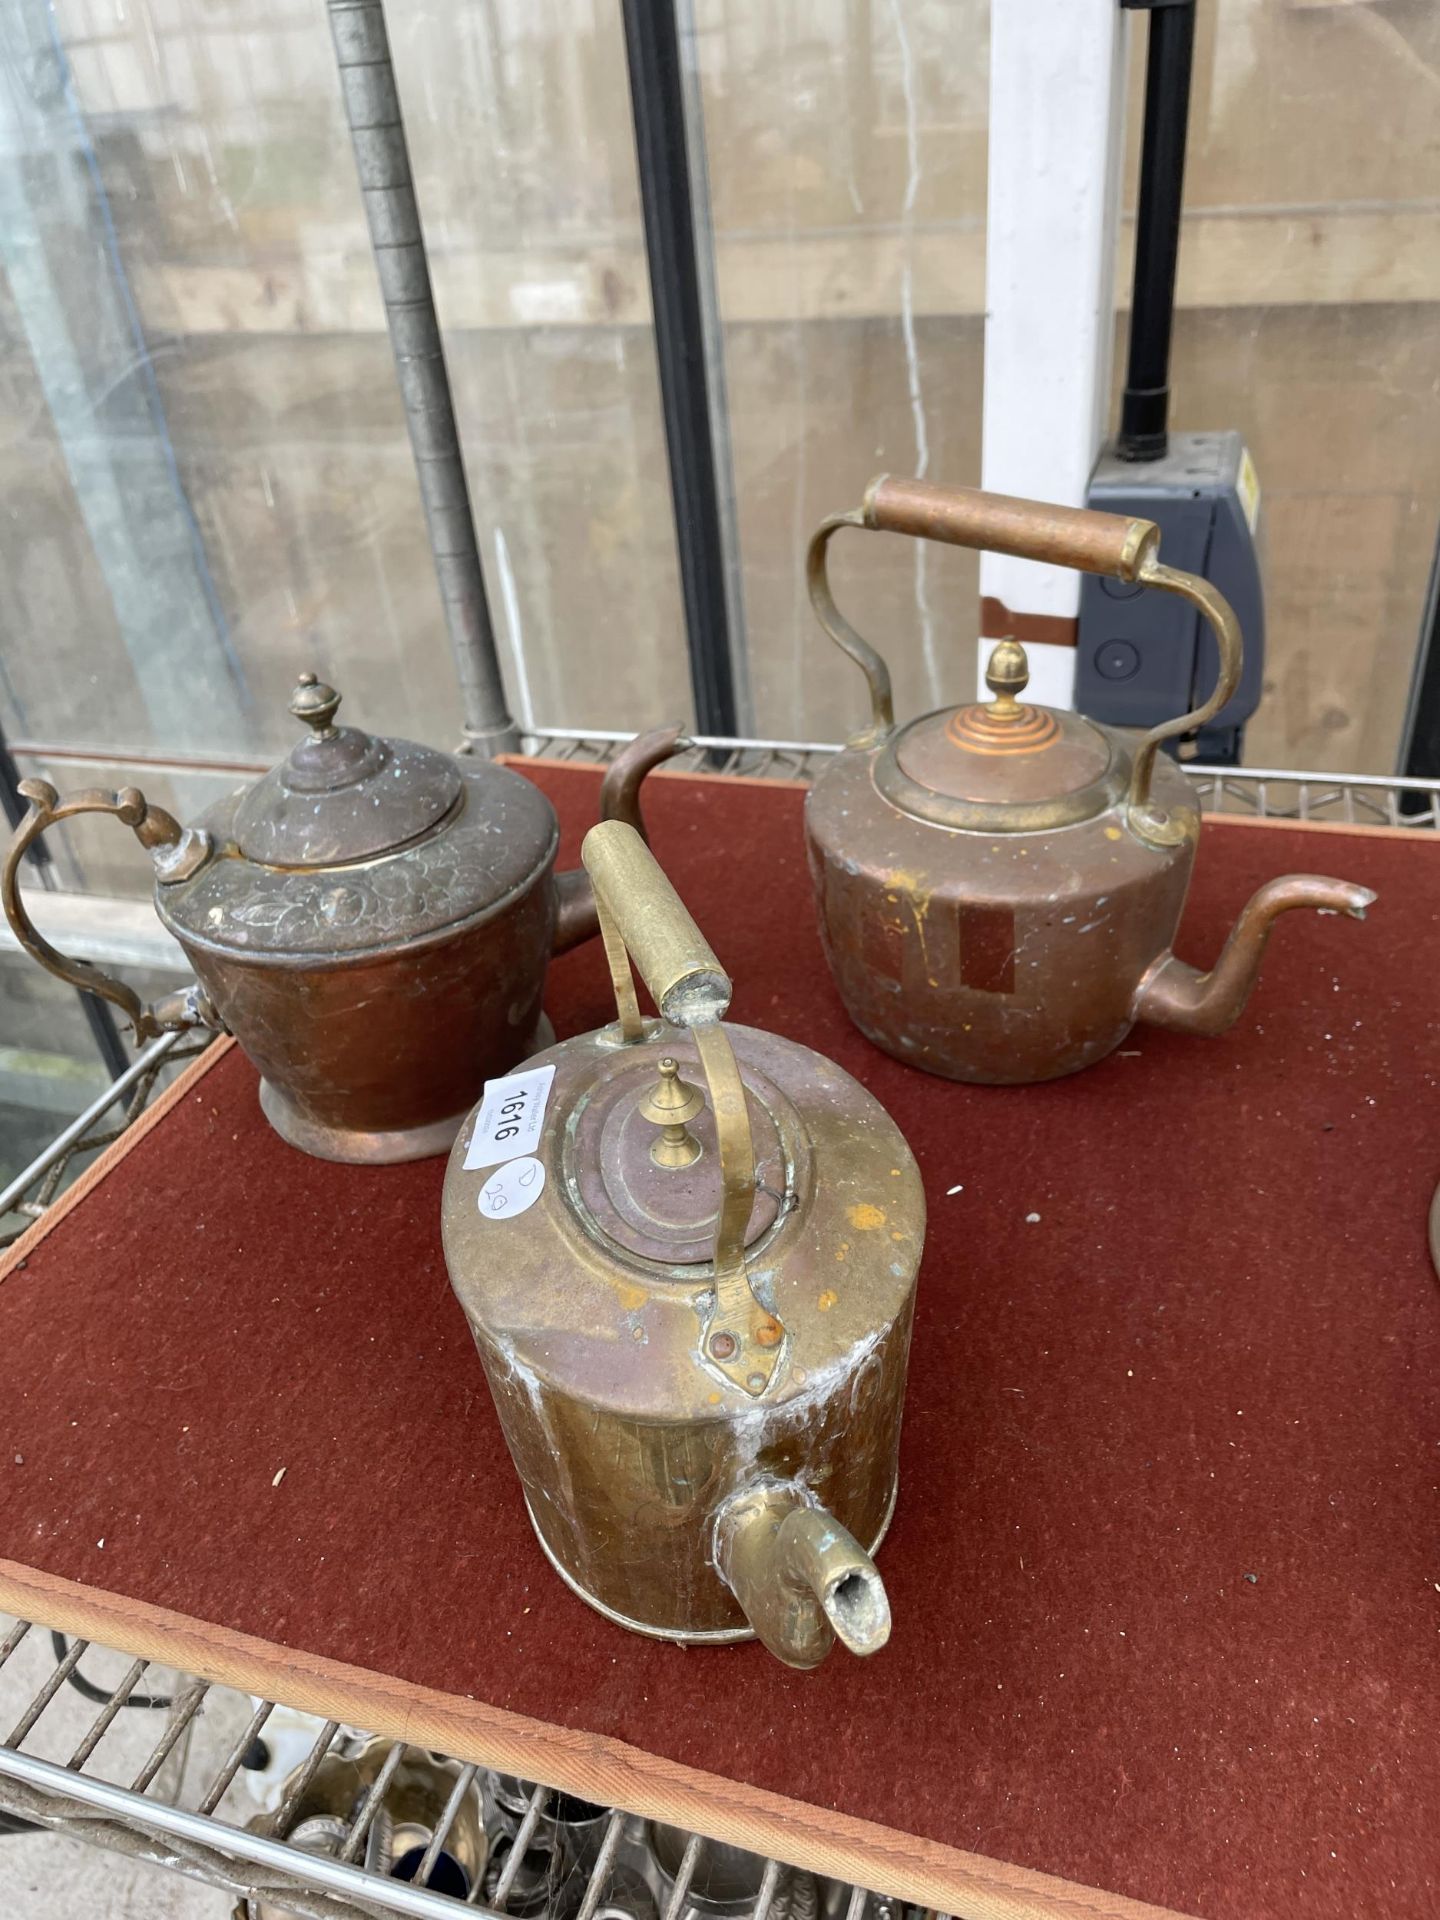 THREE SMALL KETTLES TO INCLUDE ONE BRASS AND TWO COPPER